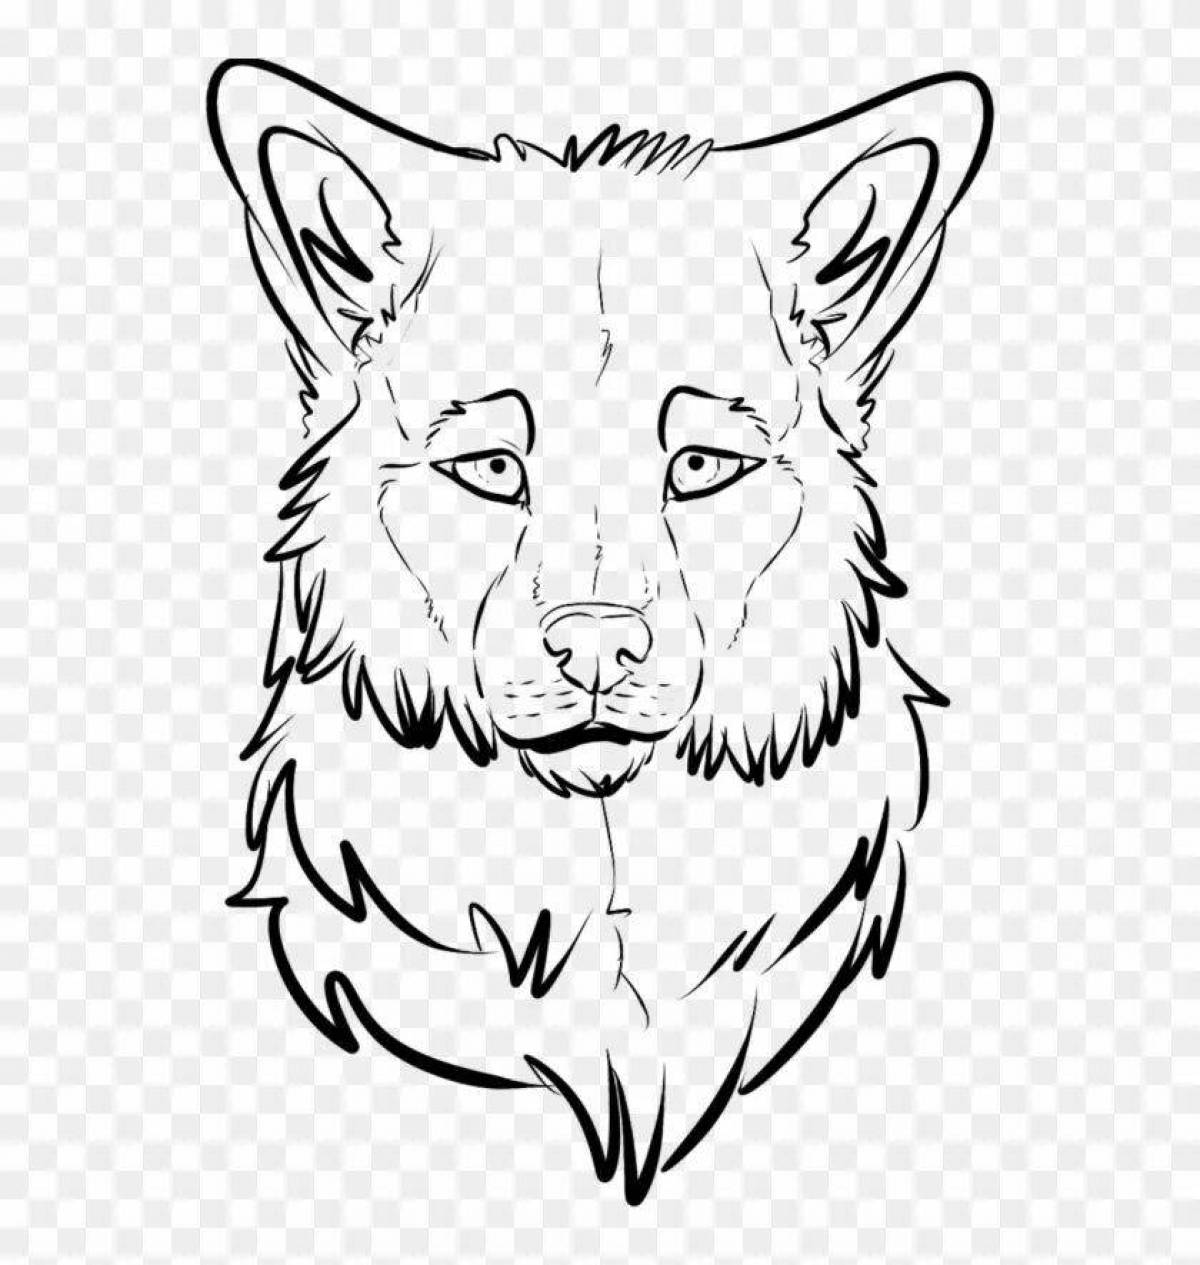 Frightening wolf face coloring book